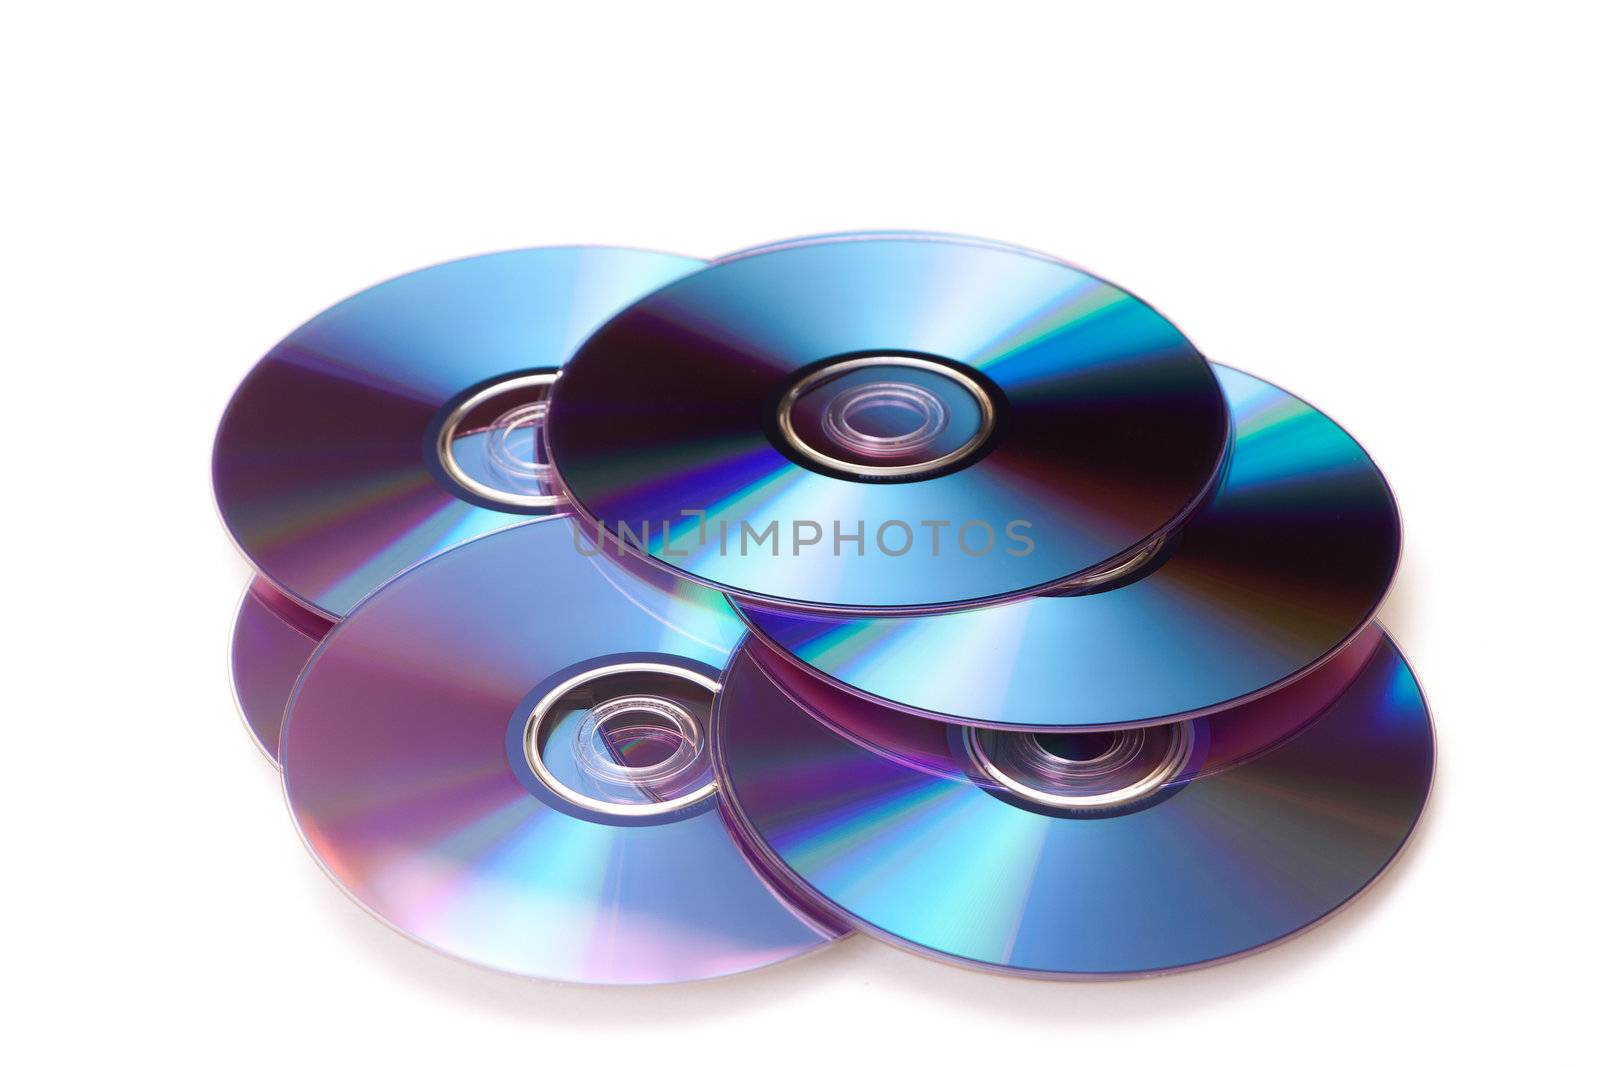 photo of dvds on white background